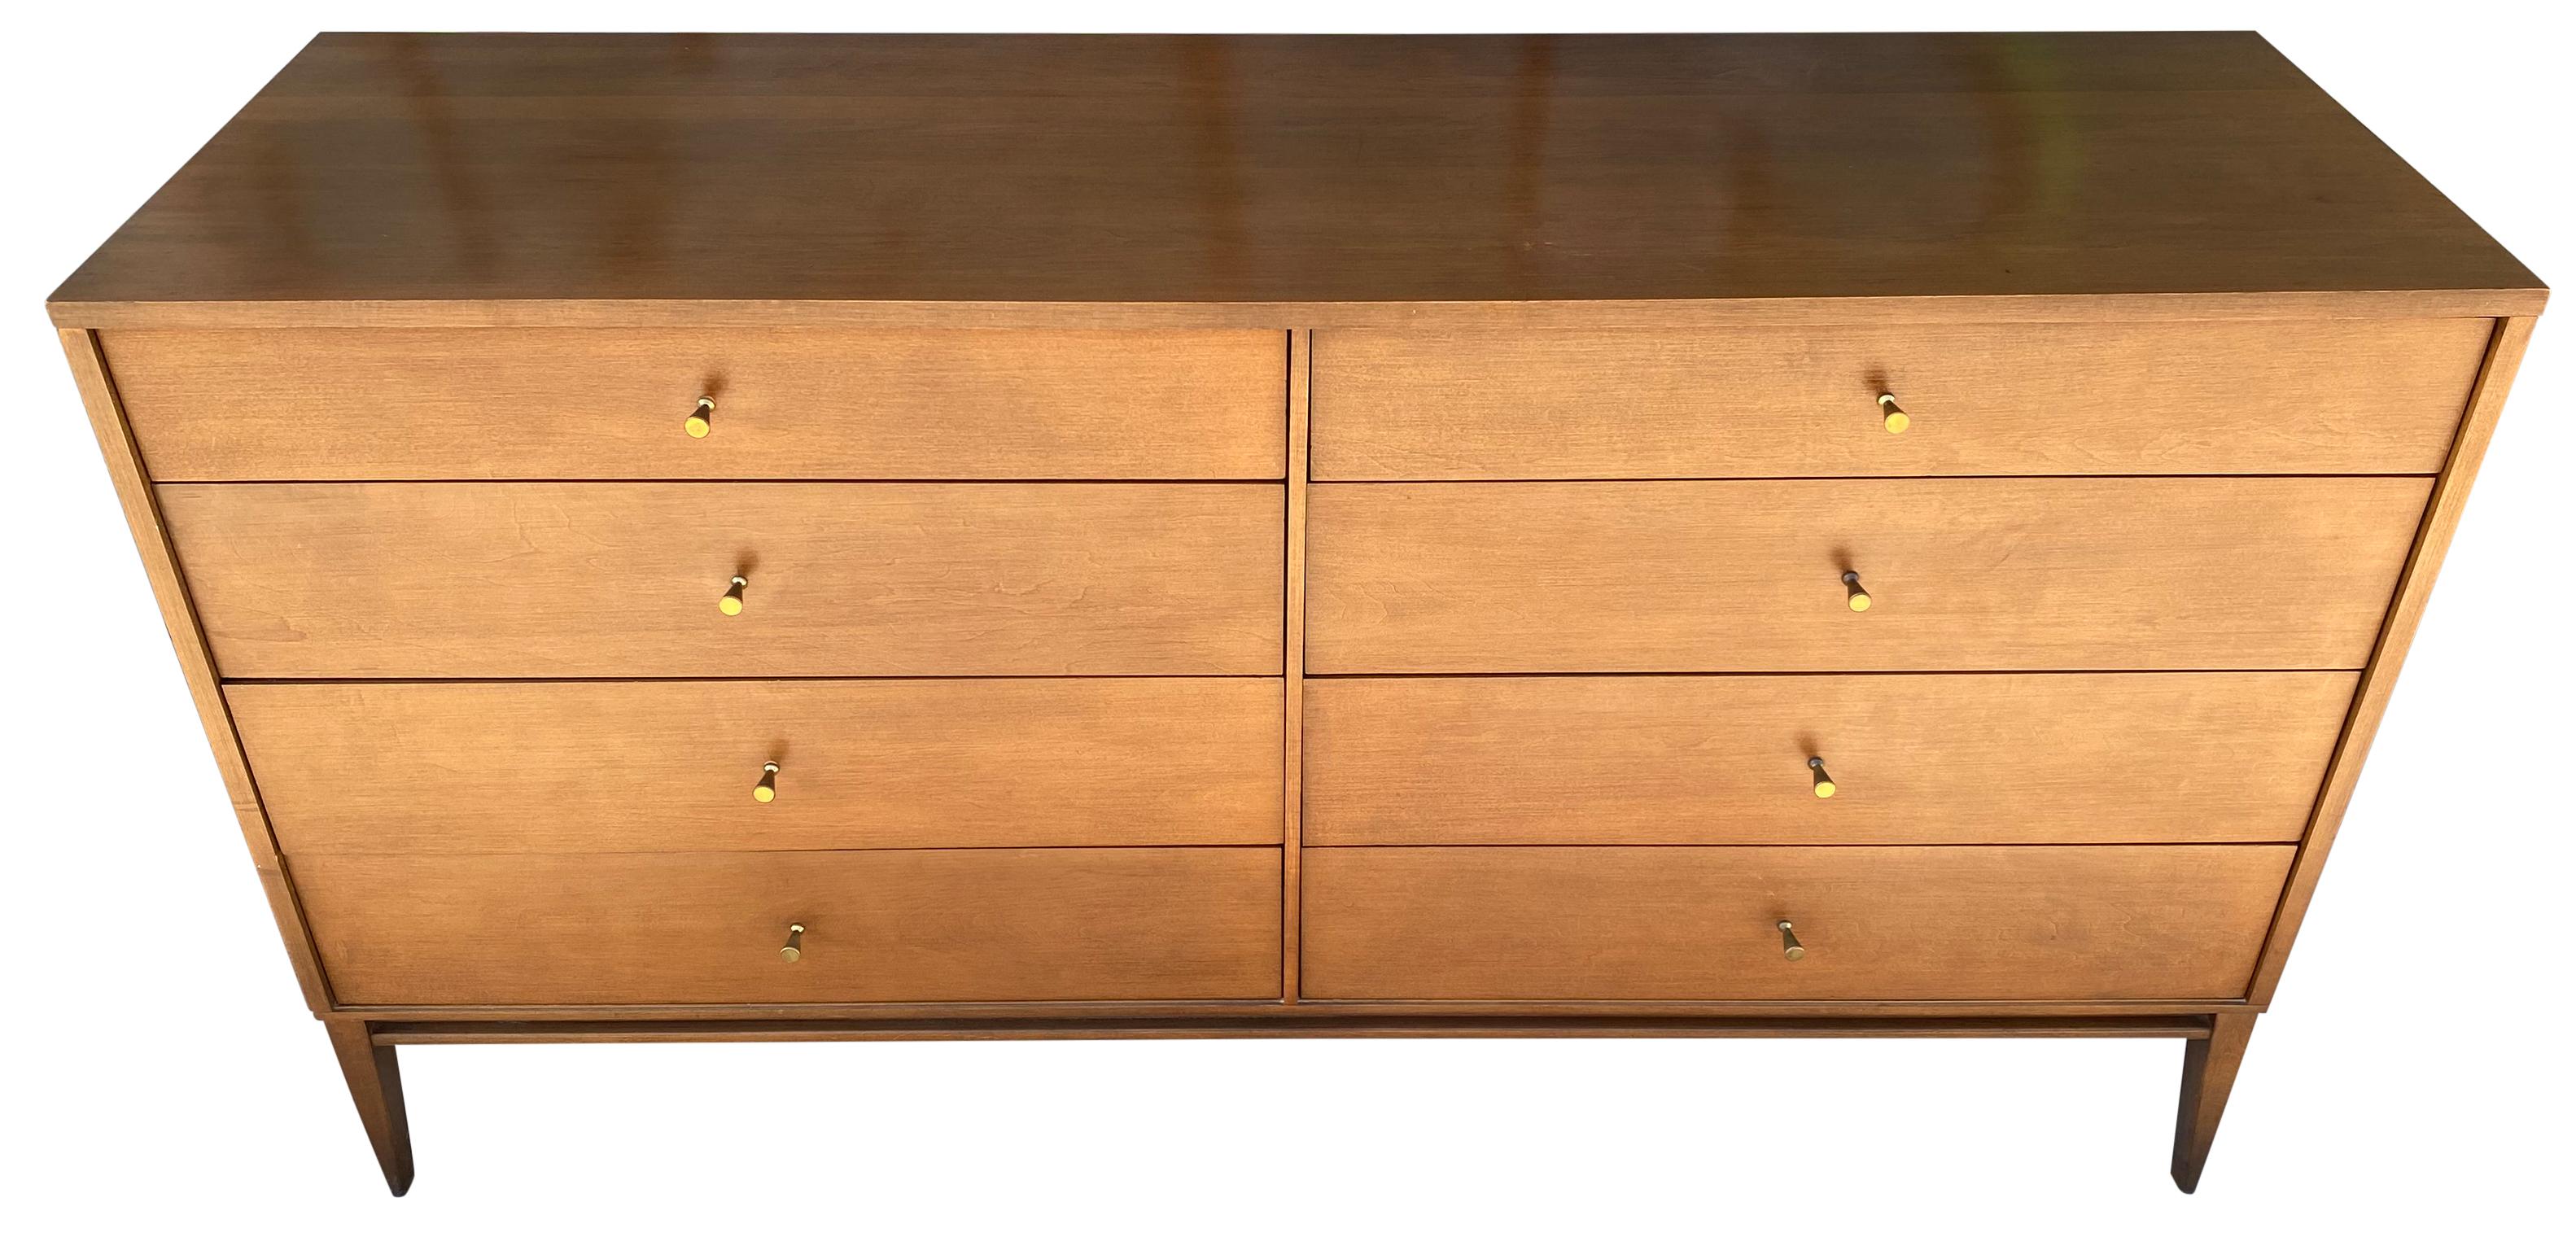 Vintage midcentury Paul McCobb 8-drawer dresser credenza planner group #1507. Beautiful dresser by Paul McCobb, circa 1950s planner group, 8-drawer, solid maple, brass cone pulls. Solid maple original base. Original foil label, clean inside and out.